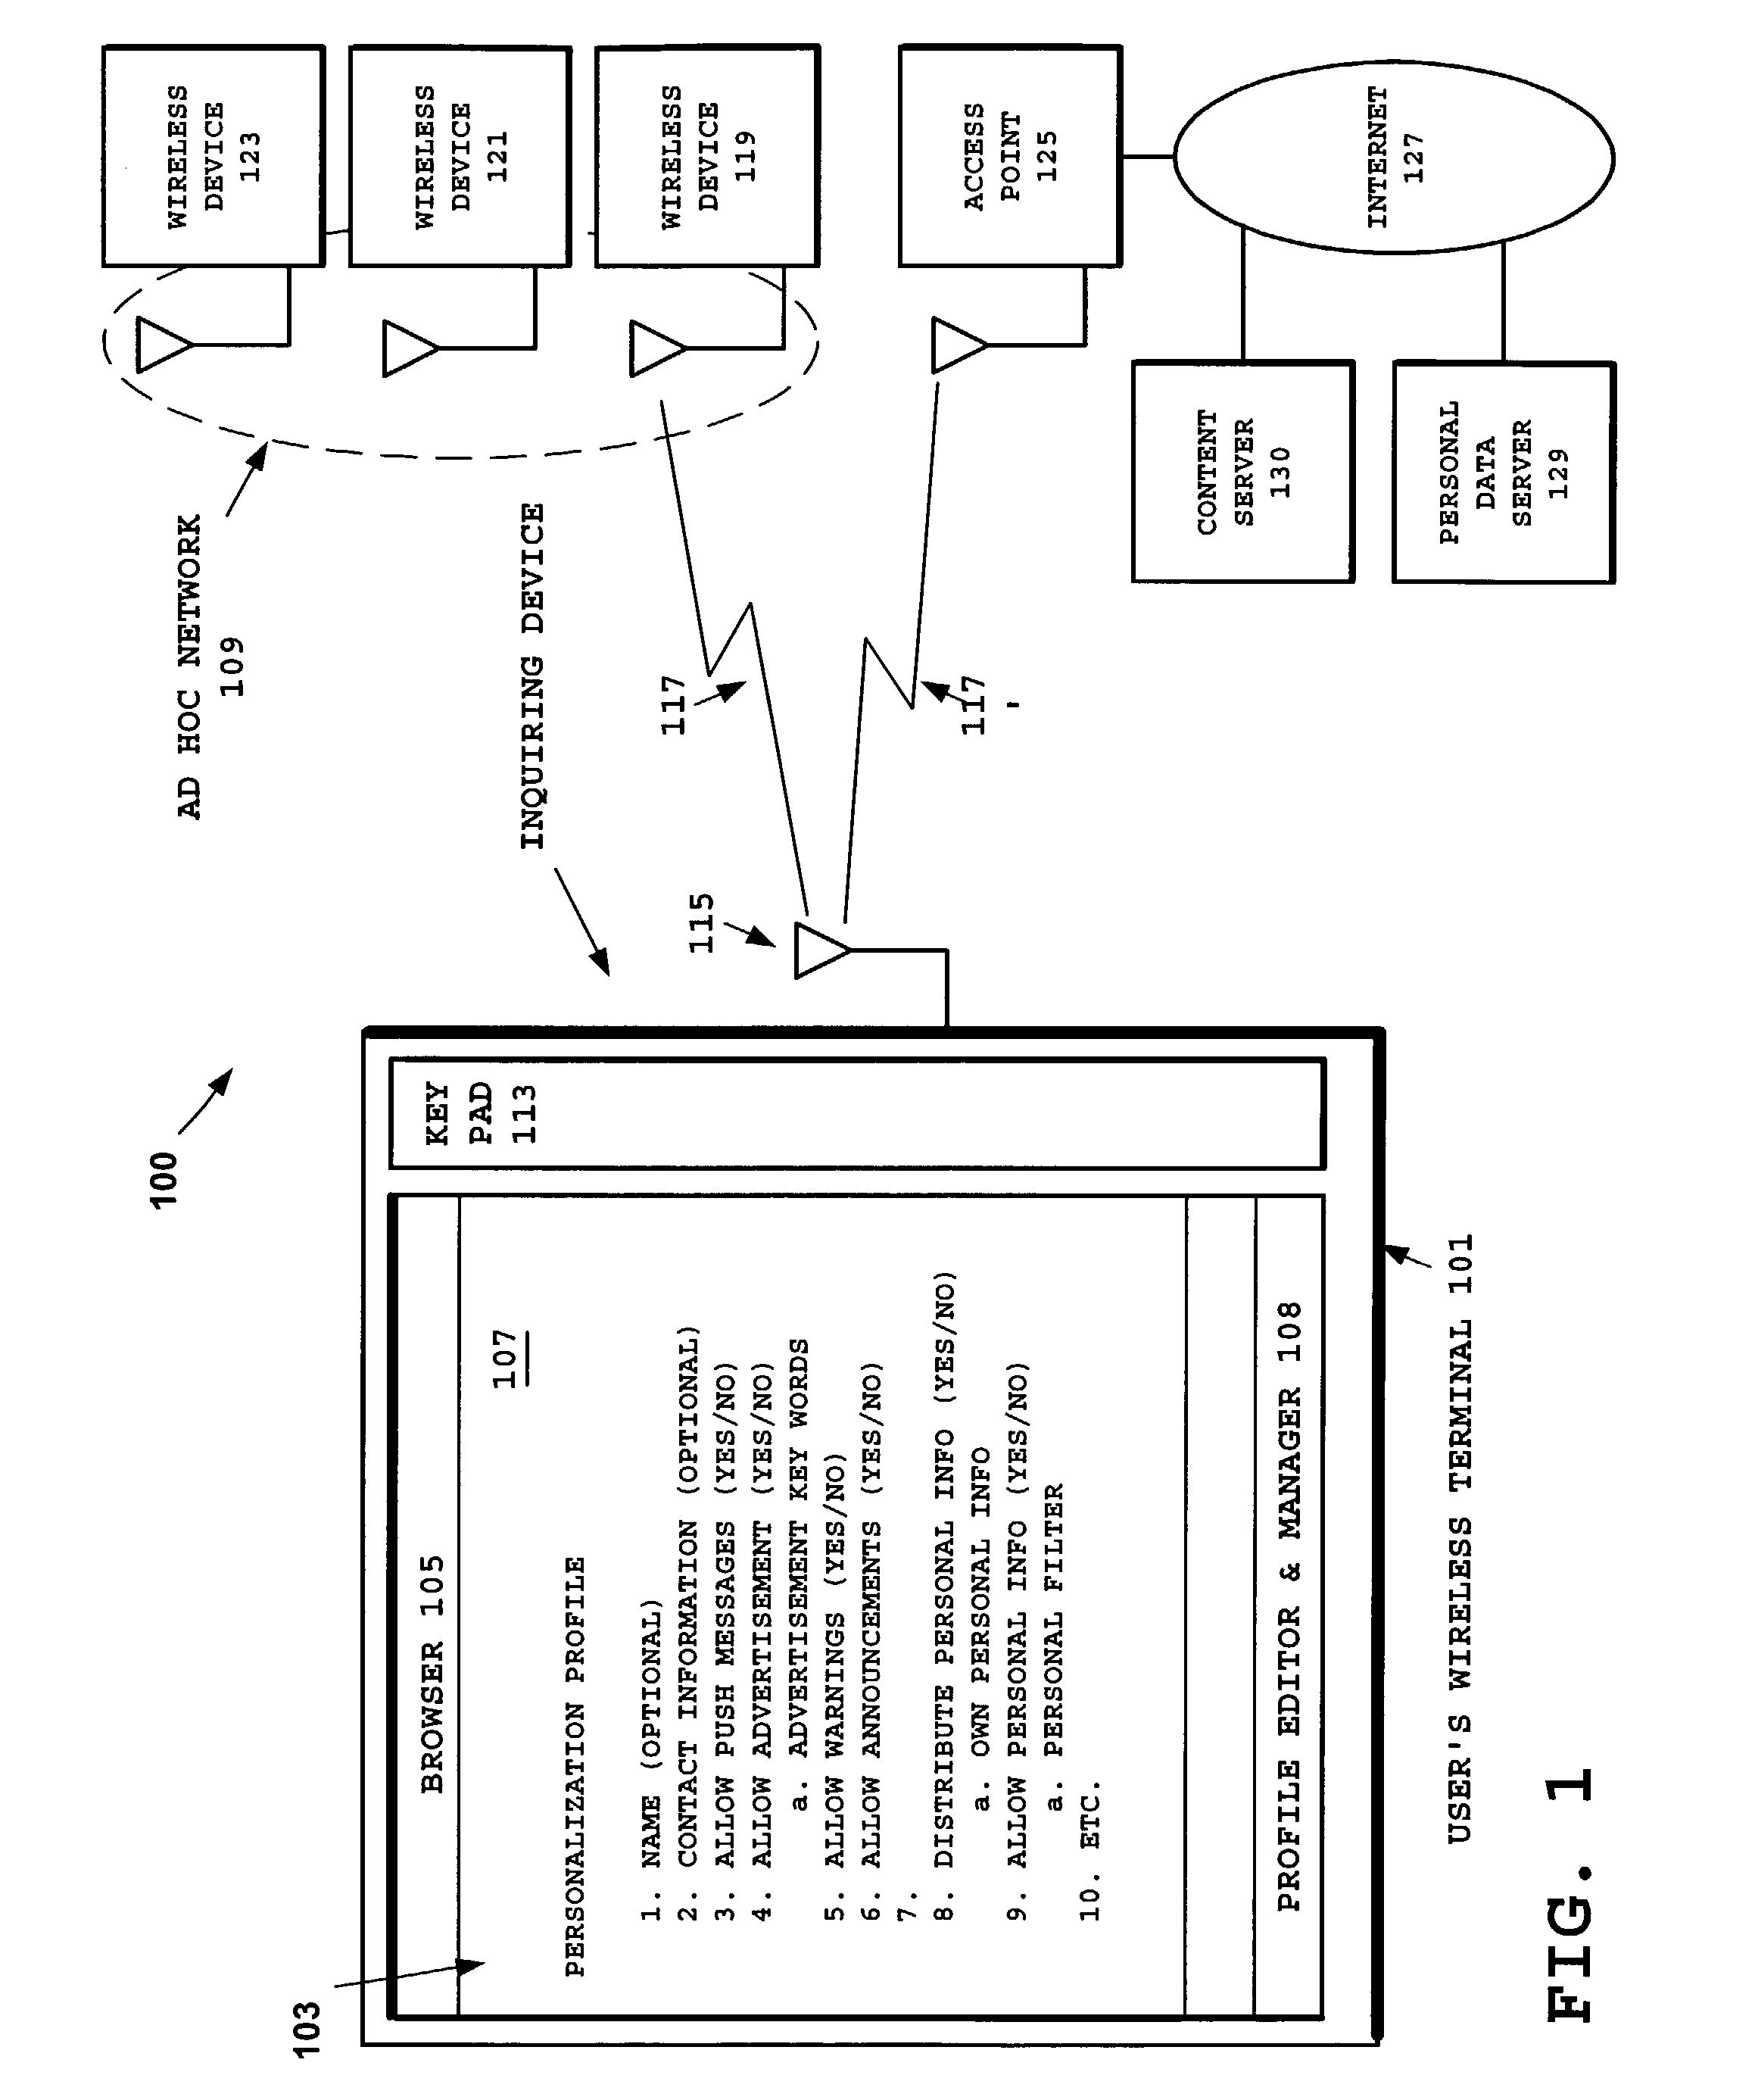 Automatic determination of access point content and services for short-range wireless terminals